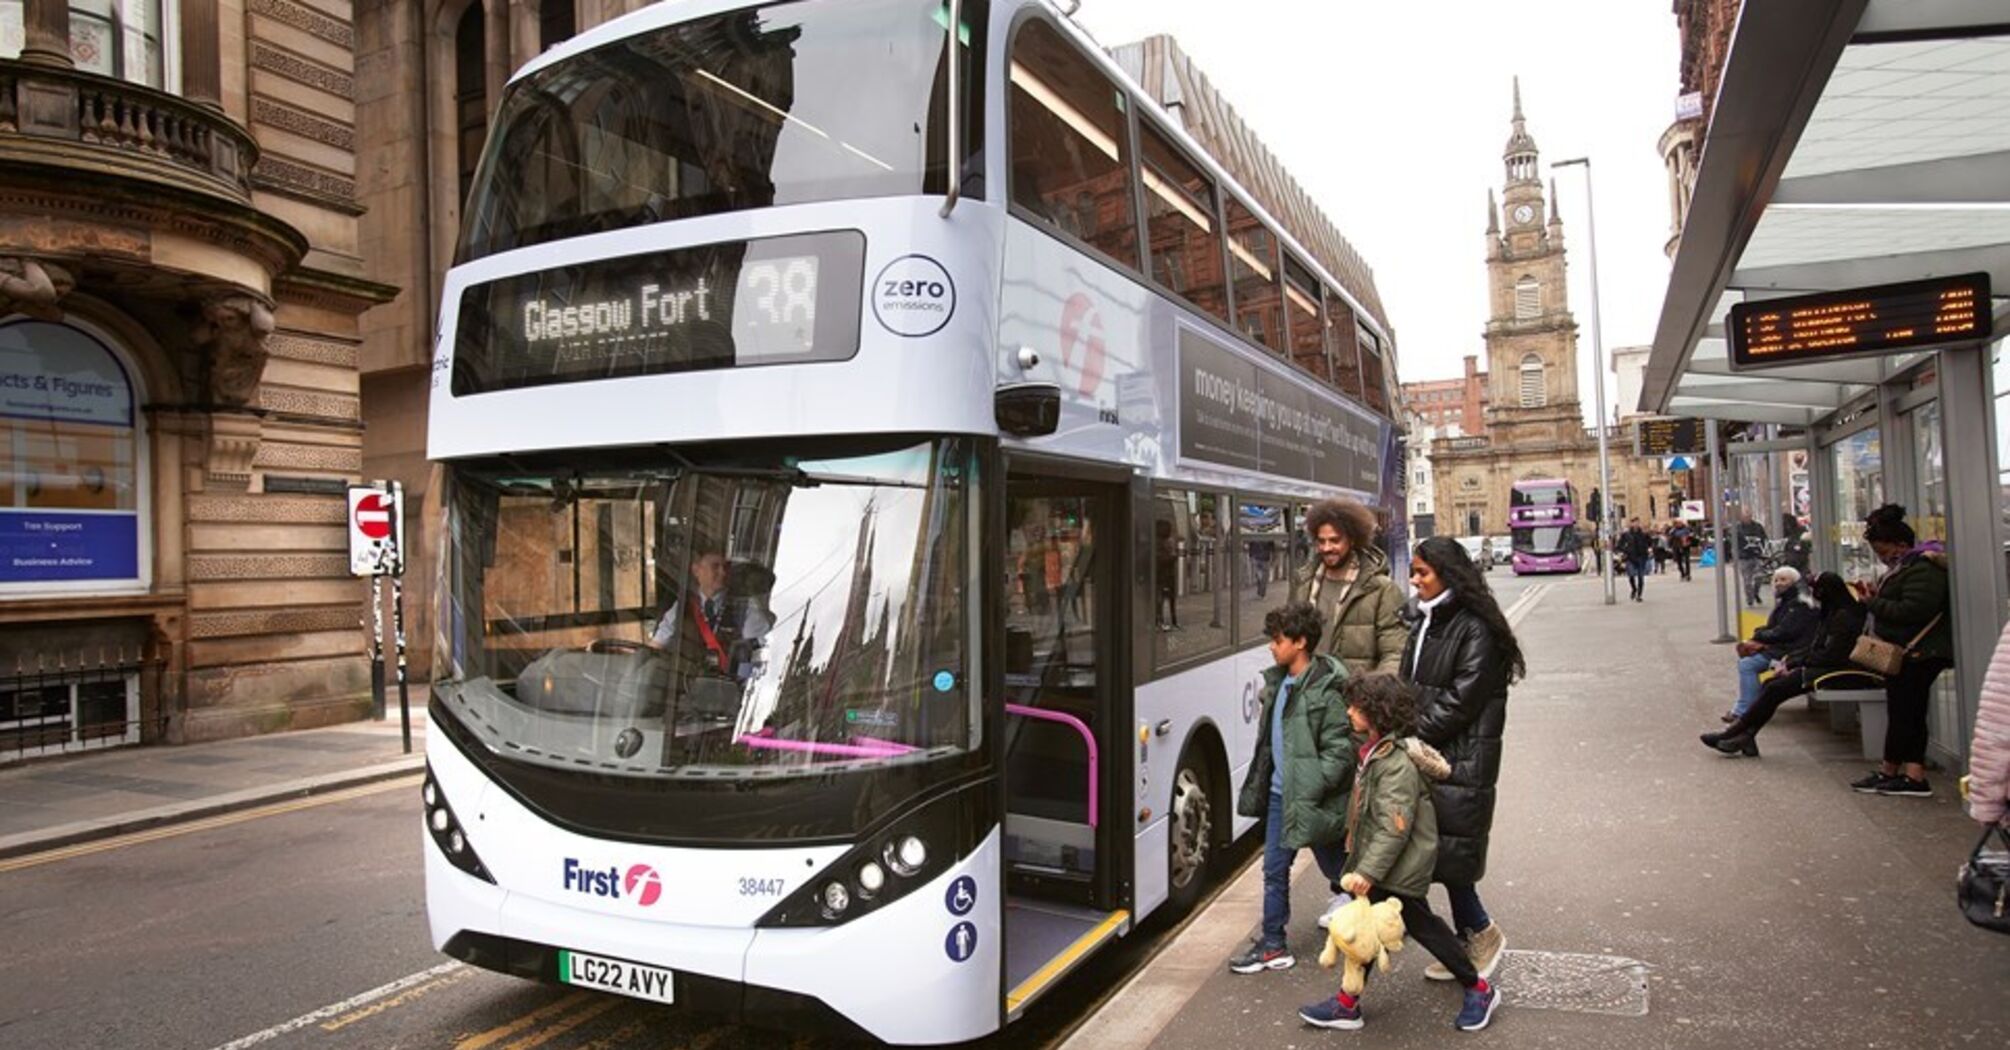 A new bus route will be launched in two small towns in the UK